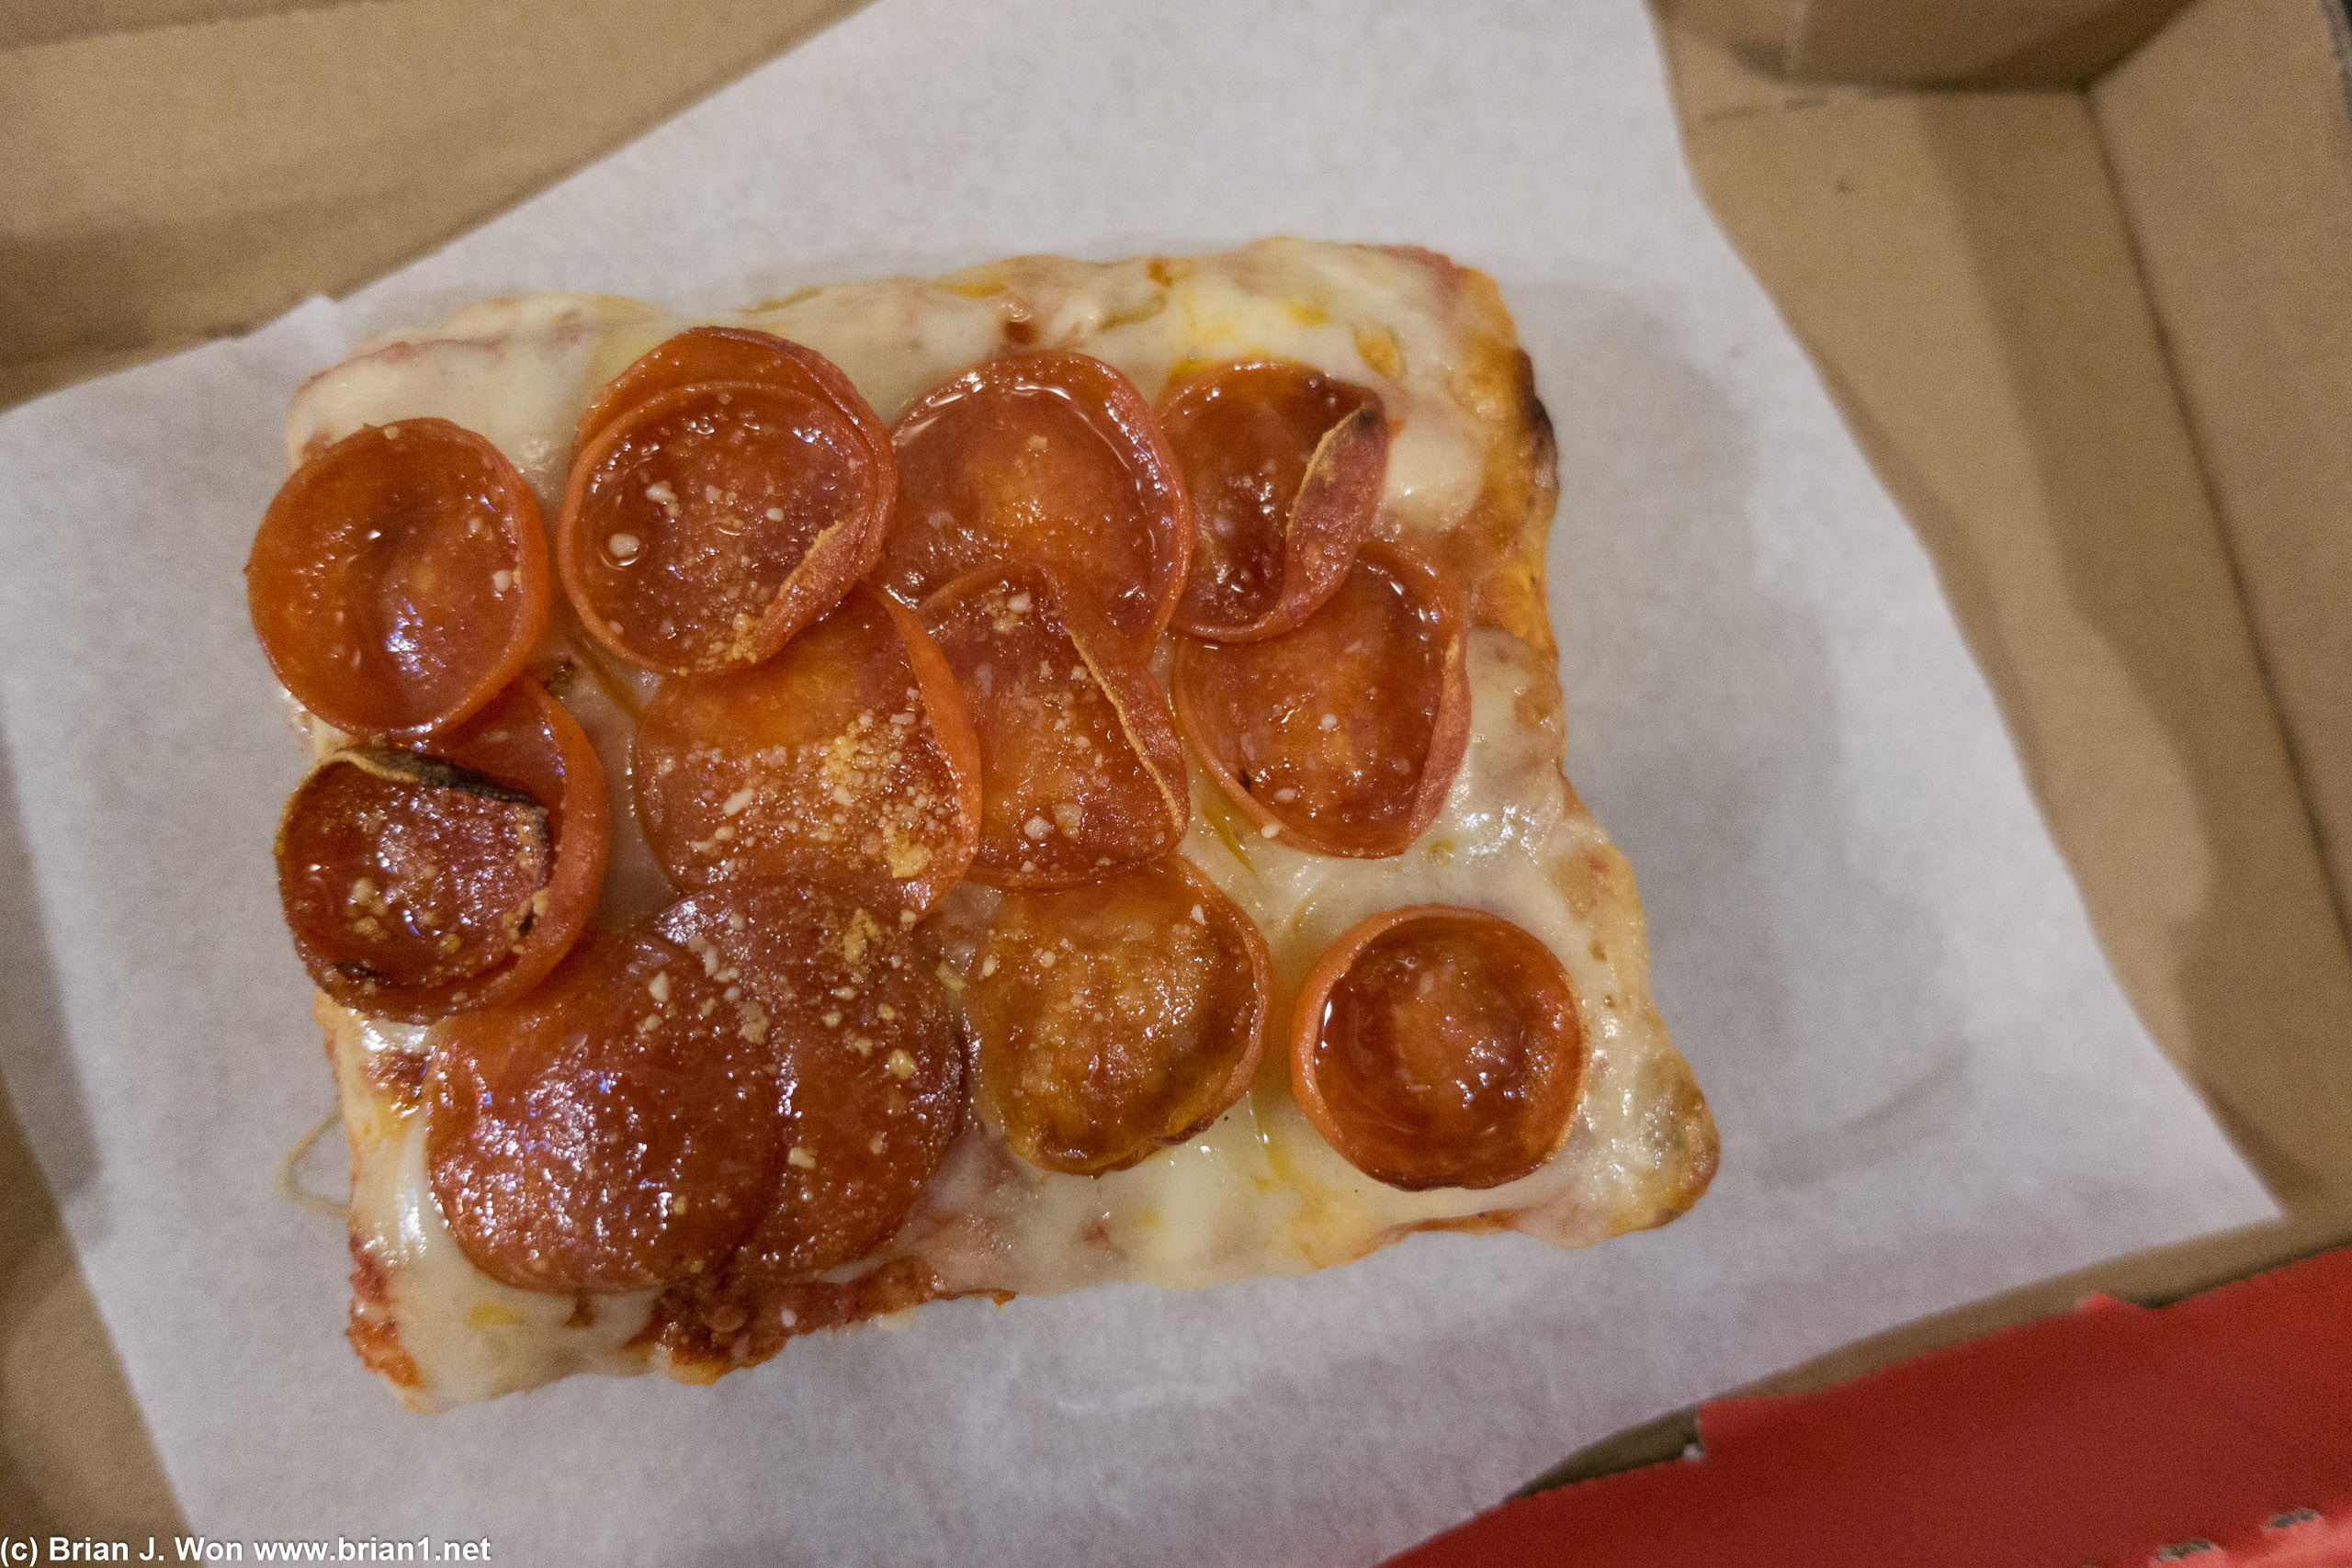 Not quite cheesy enough, and pepperoni slices, while ample in number, were way too thin.